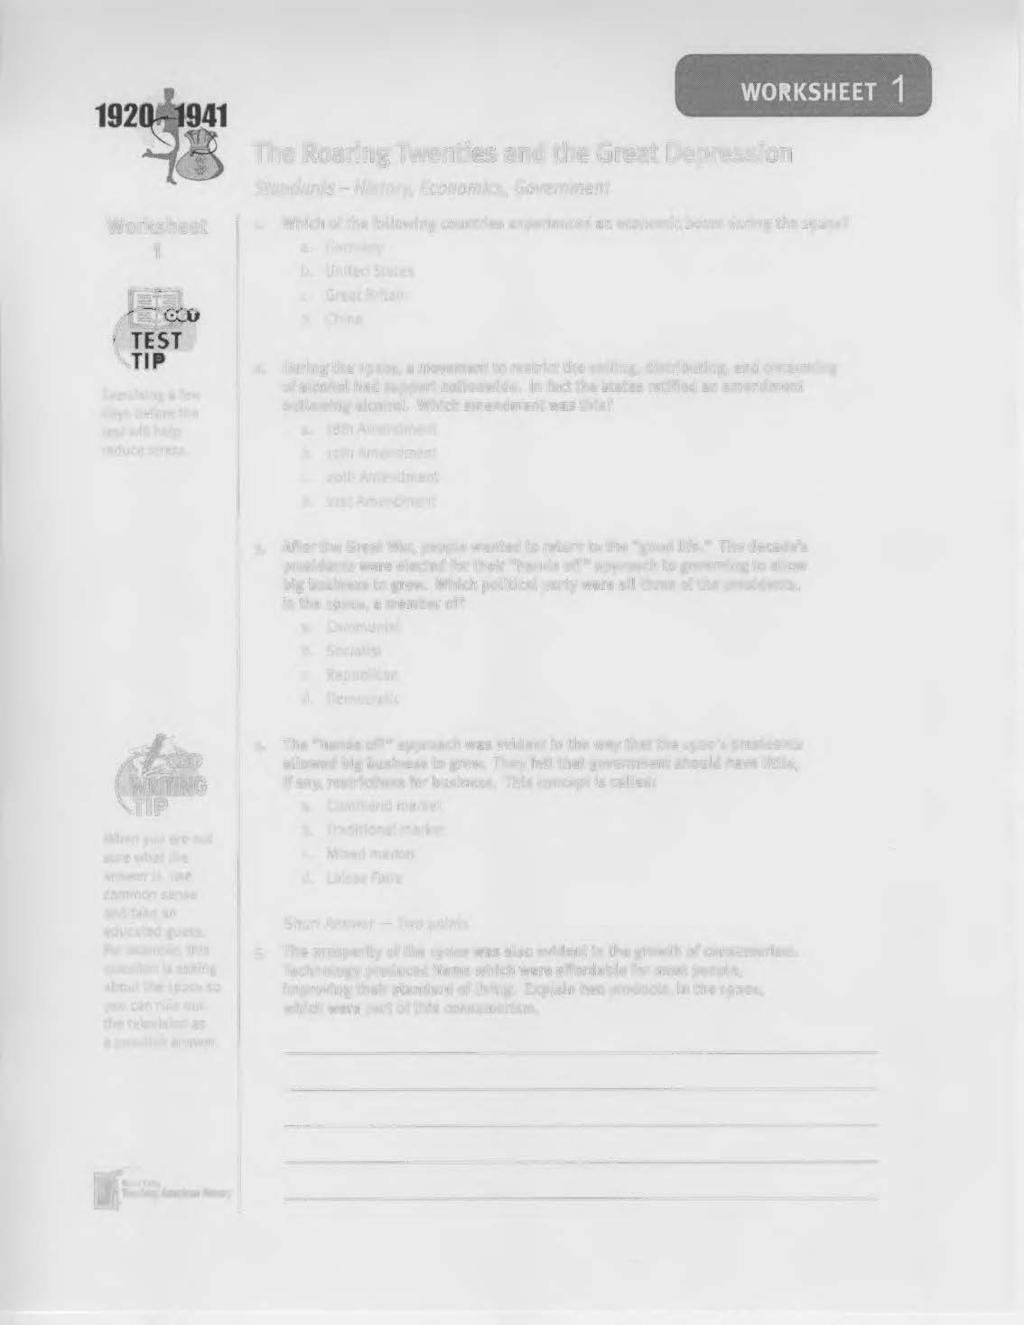 Worksheet 1 Standards- History, Economics, Government 1. Which of the following countries experienced an economic boom during the 1920s? a. Germany b. United States c. Great Britain d. China 2.